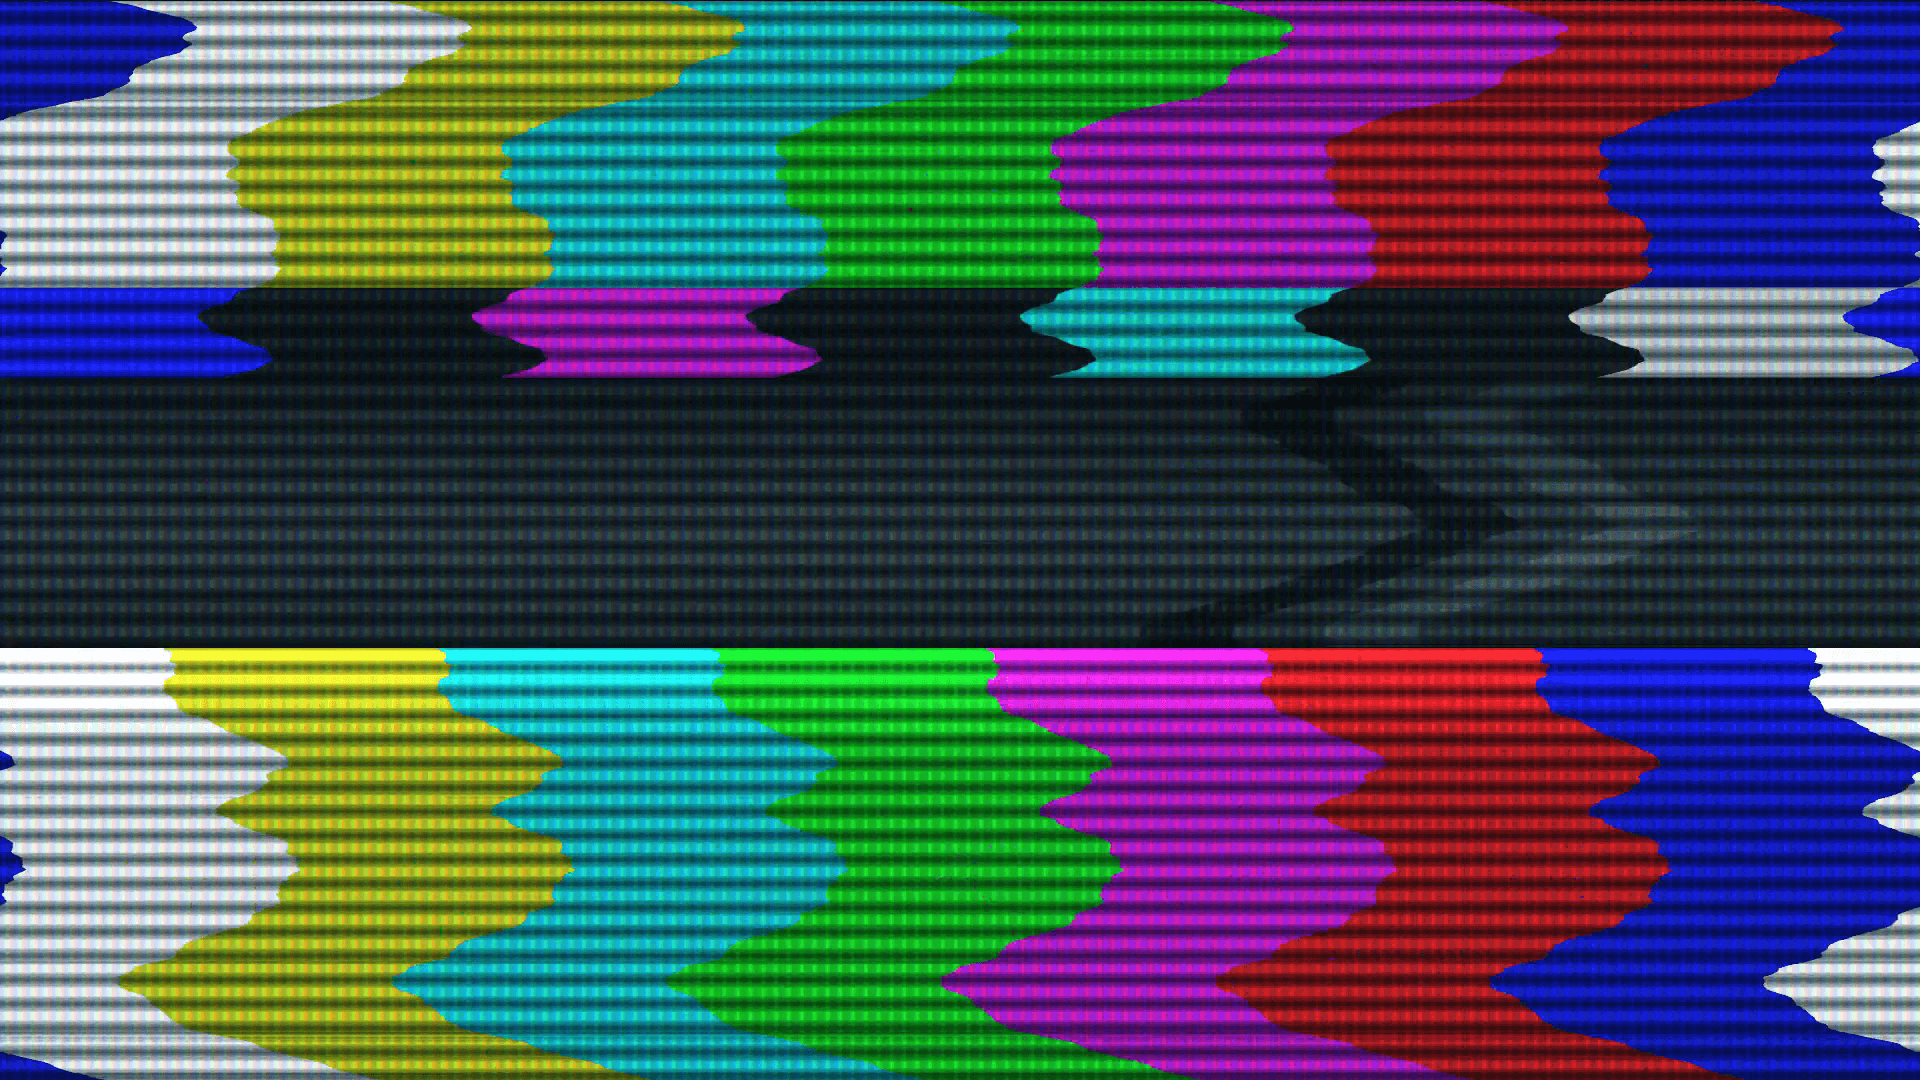 Tv Test Screen With Colorful Lines